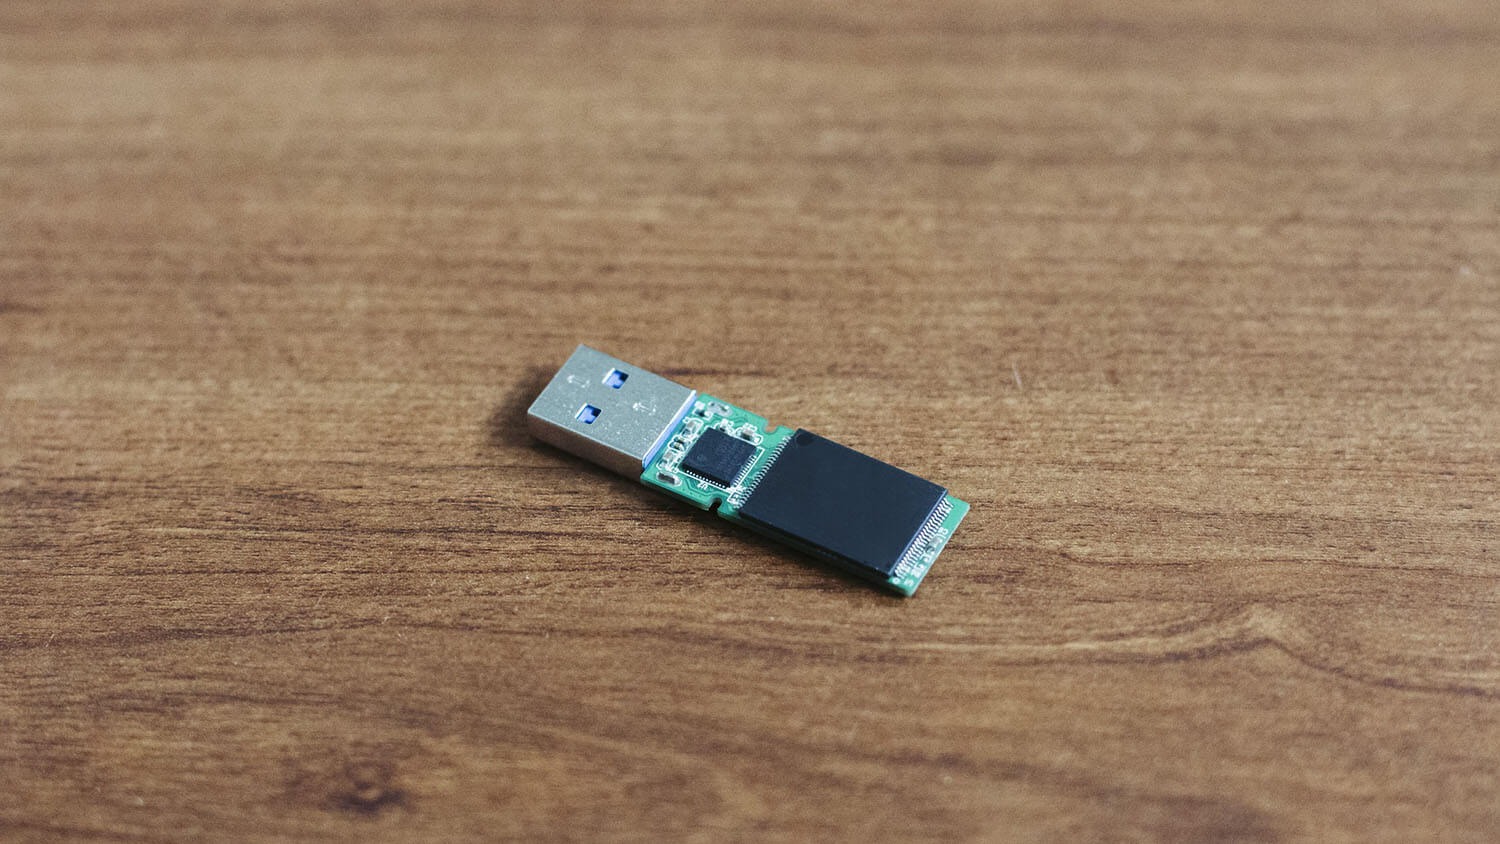 how can i format a usb drive to fat32 on windows 10